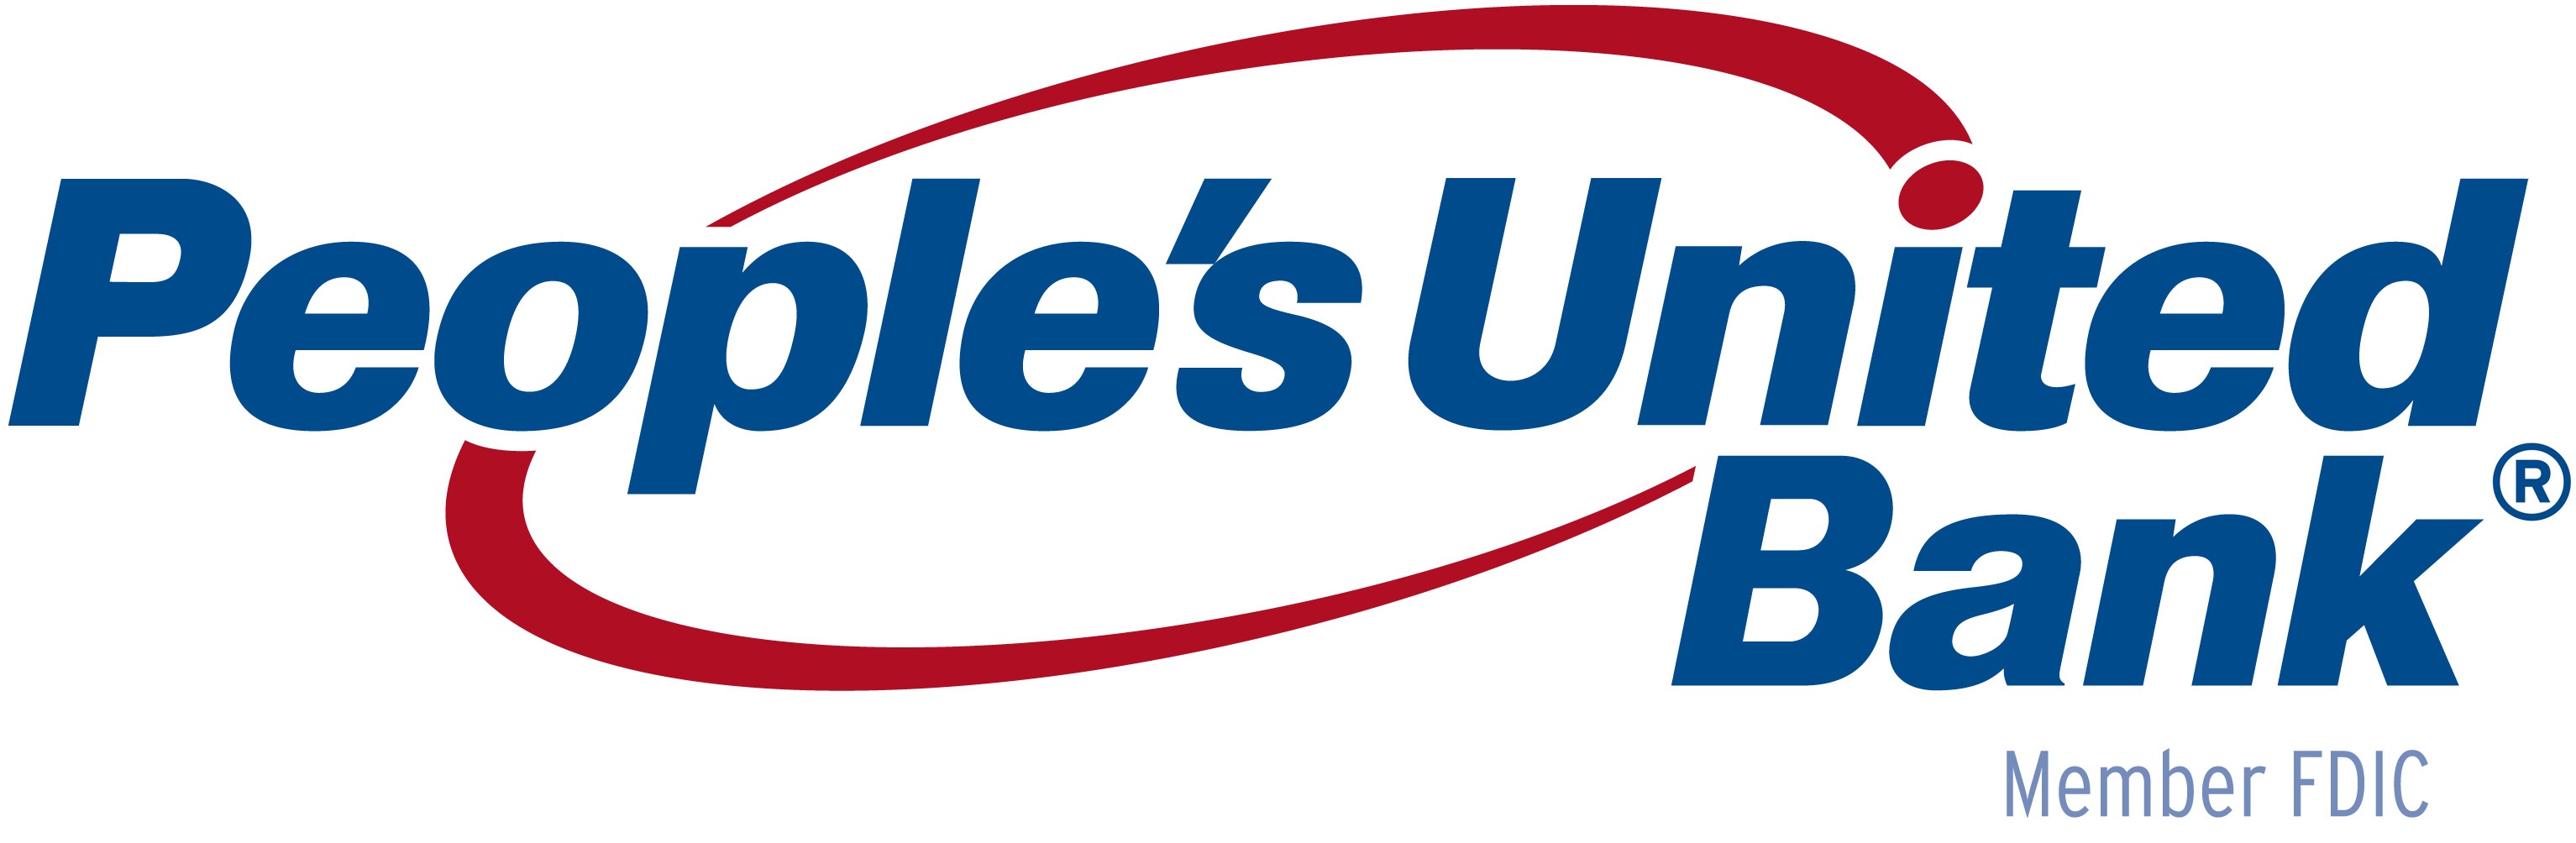 People's United Bank Clickable Logo